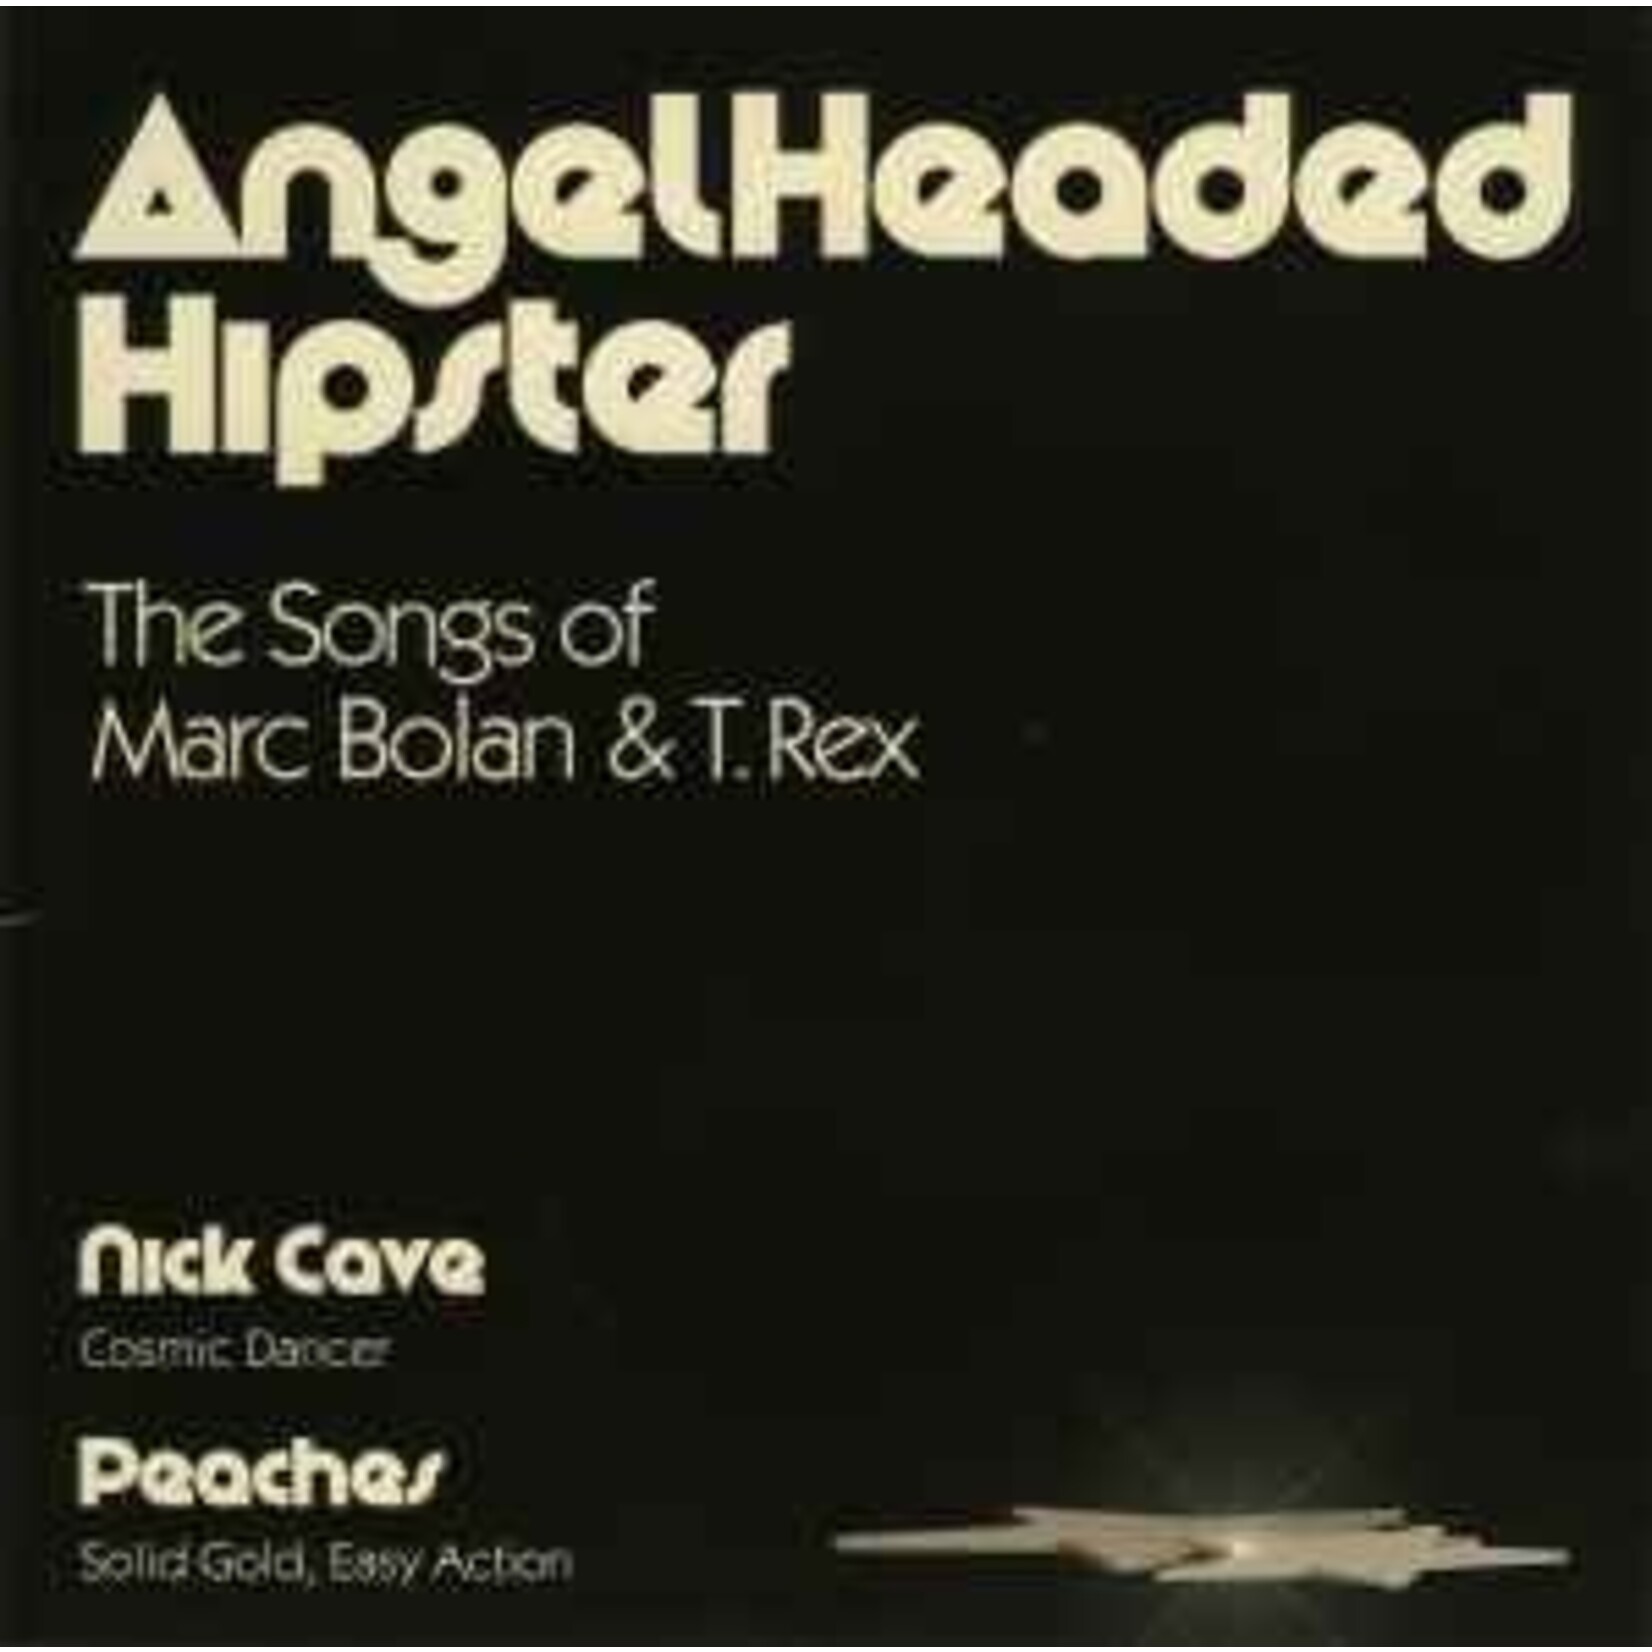 Nick Cave / Peaches – AngelHeaded Hipster 7" BF20